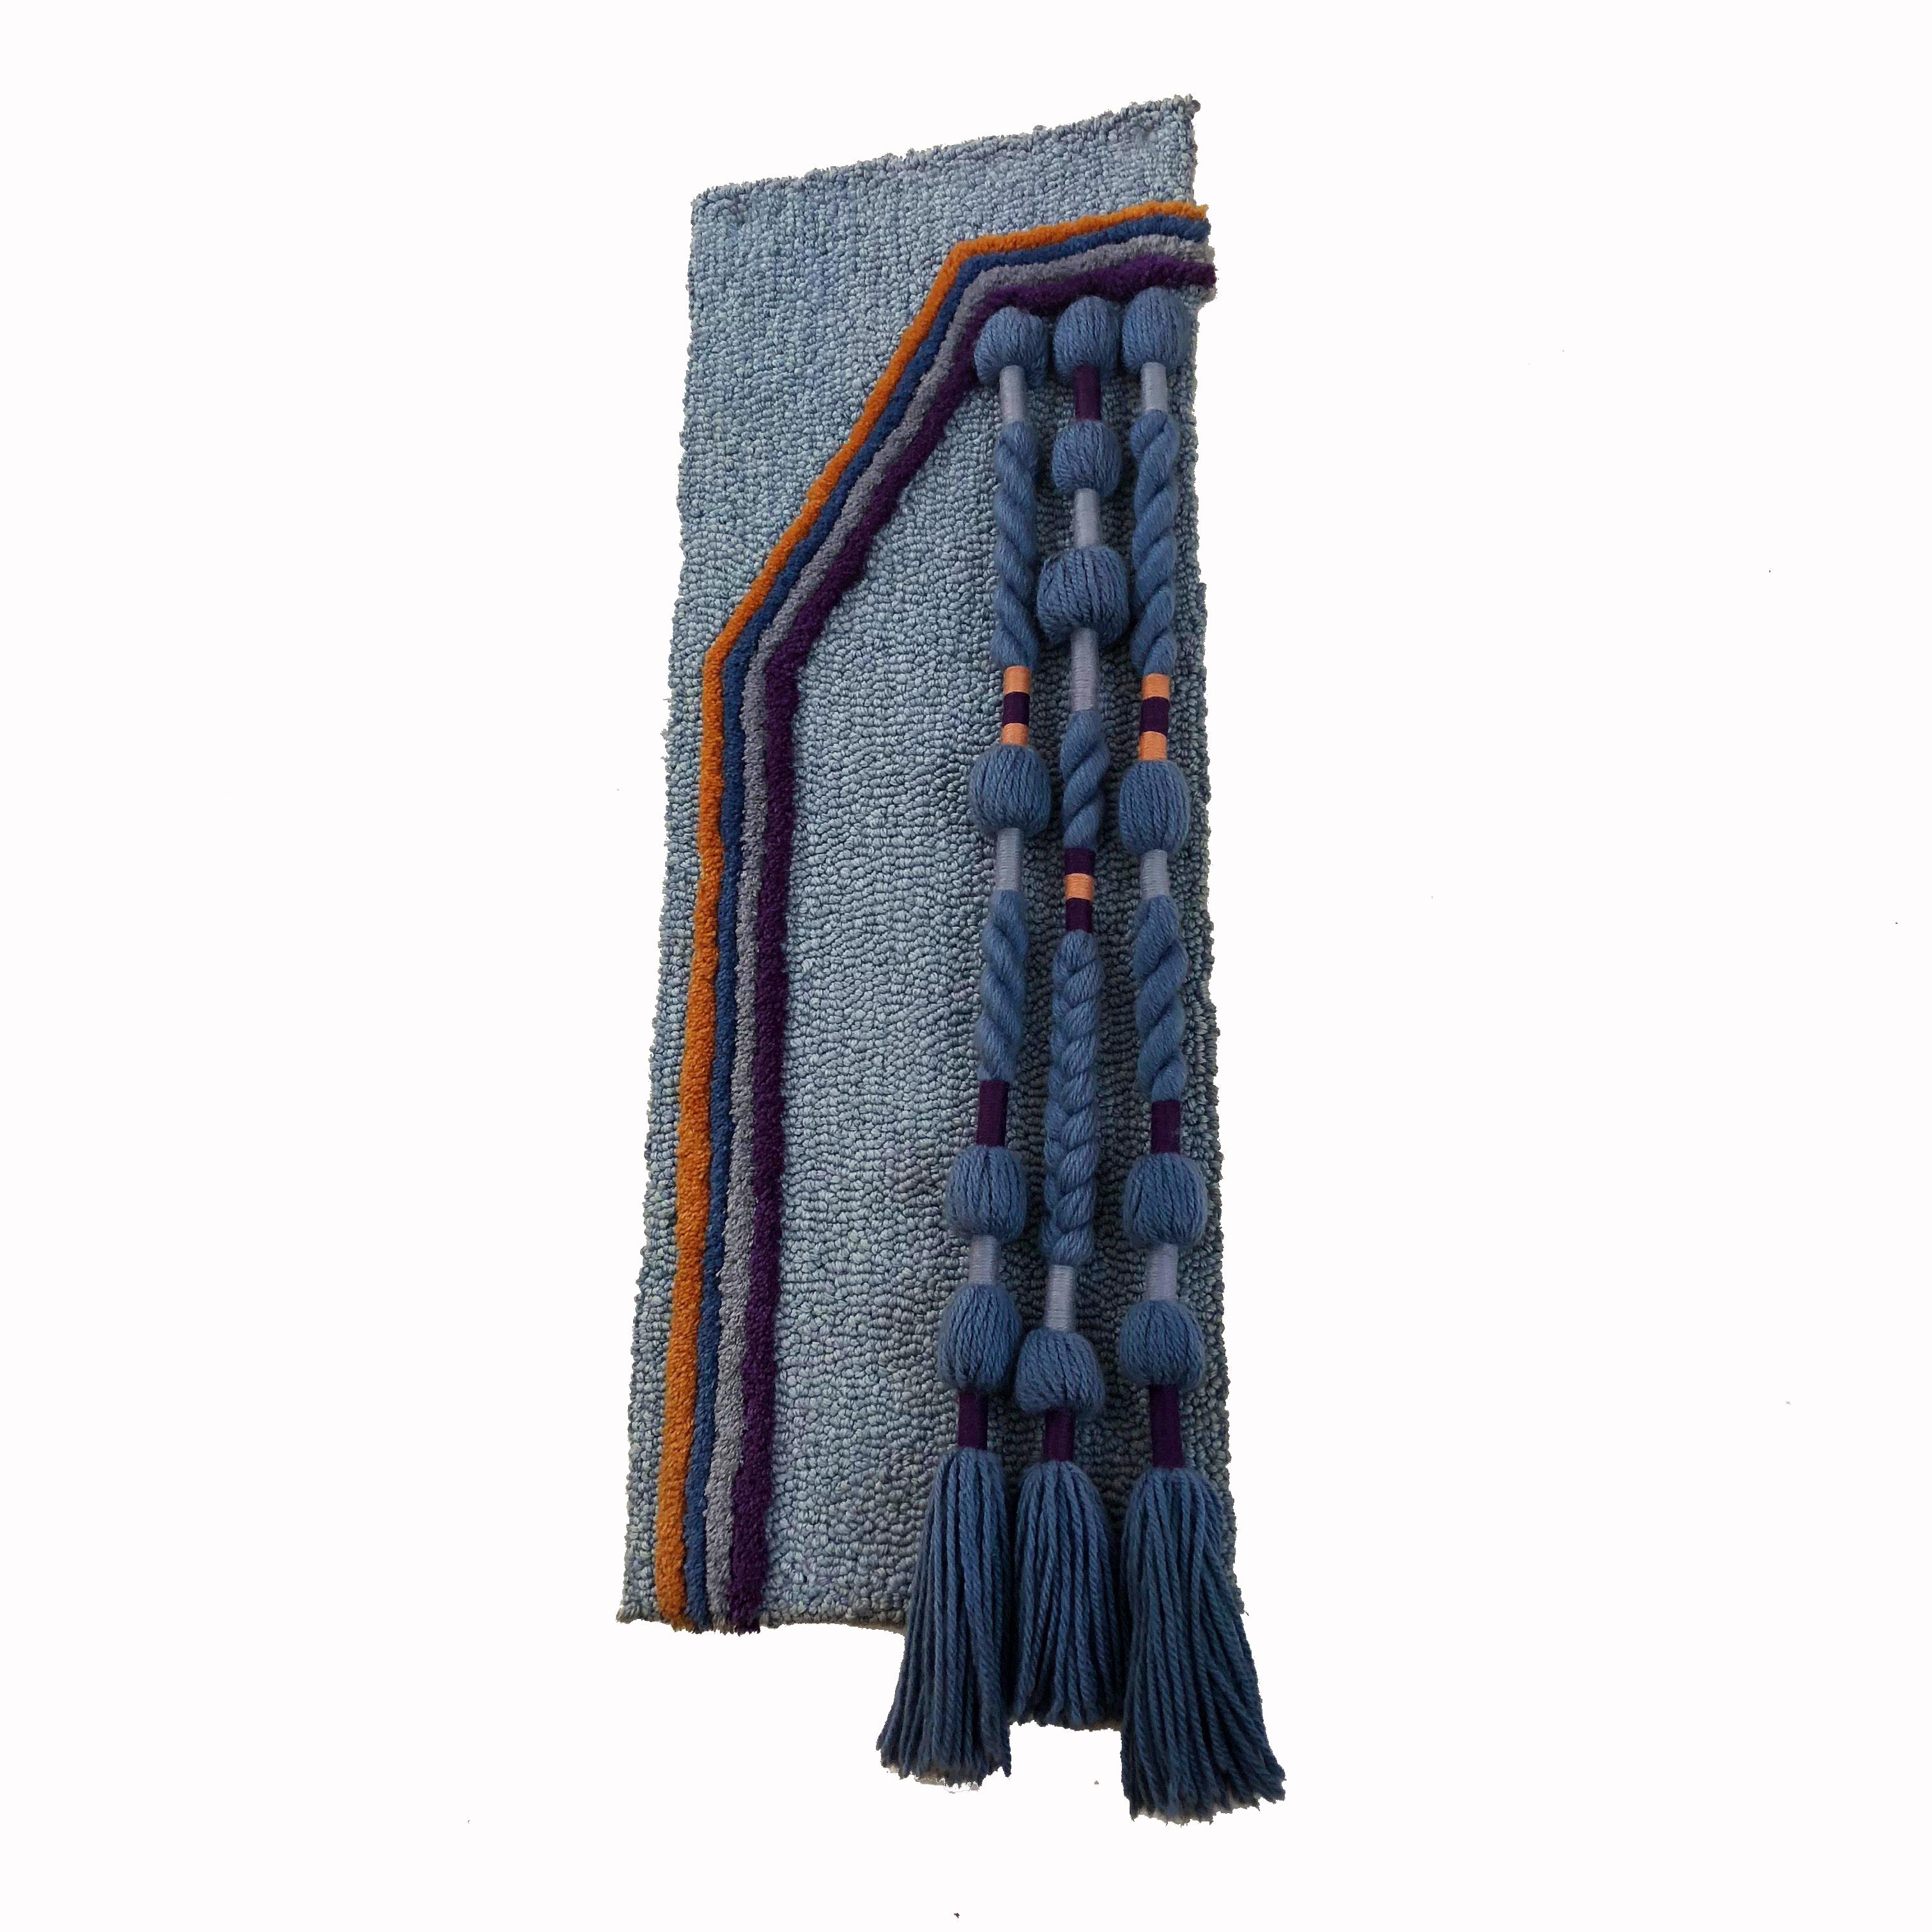 Article:

Wall rug


Decade:

1970s


Origin:

Germany


Producer:

Schloss Hackhausen, Germany


Design:

Ewald Kröner


This rug is a great example of 1970s pop art interior. Made in high quality handmade macrame weaving